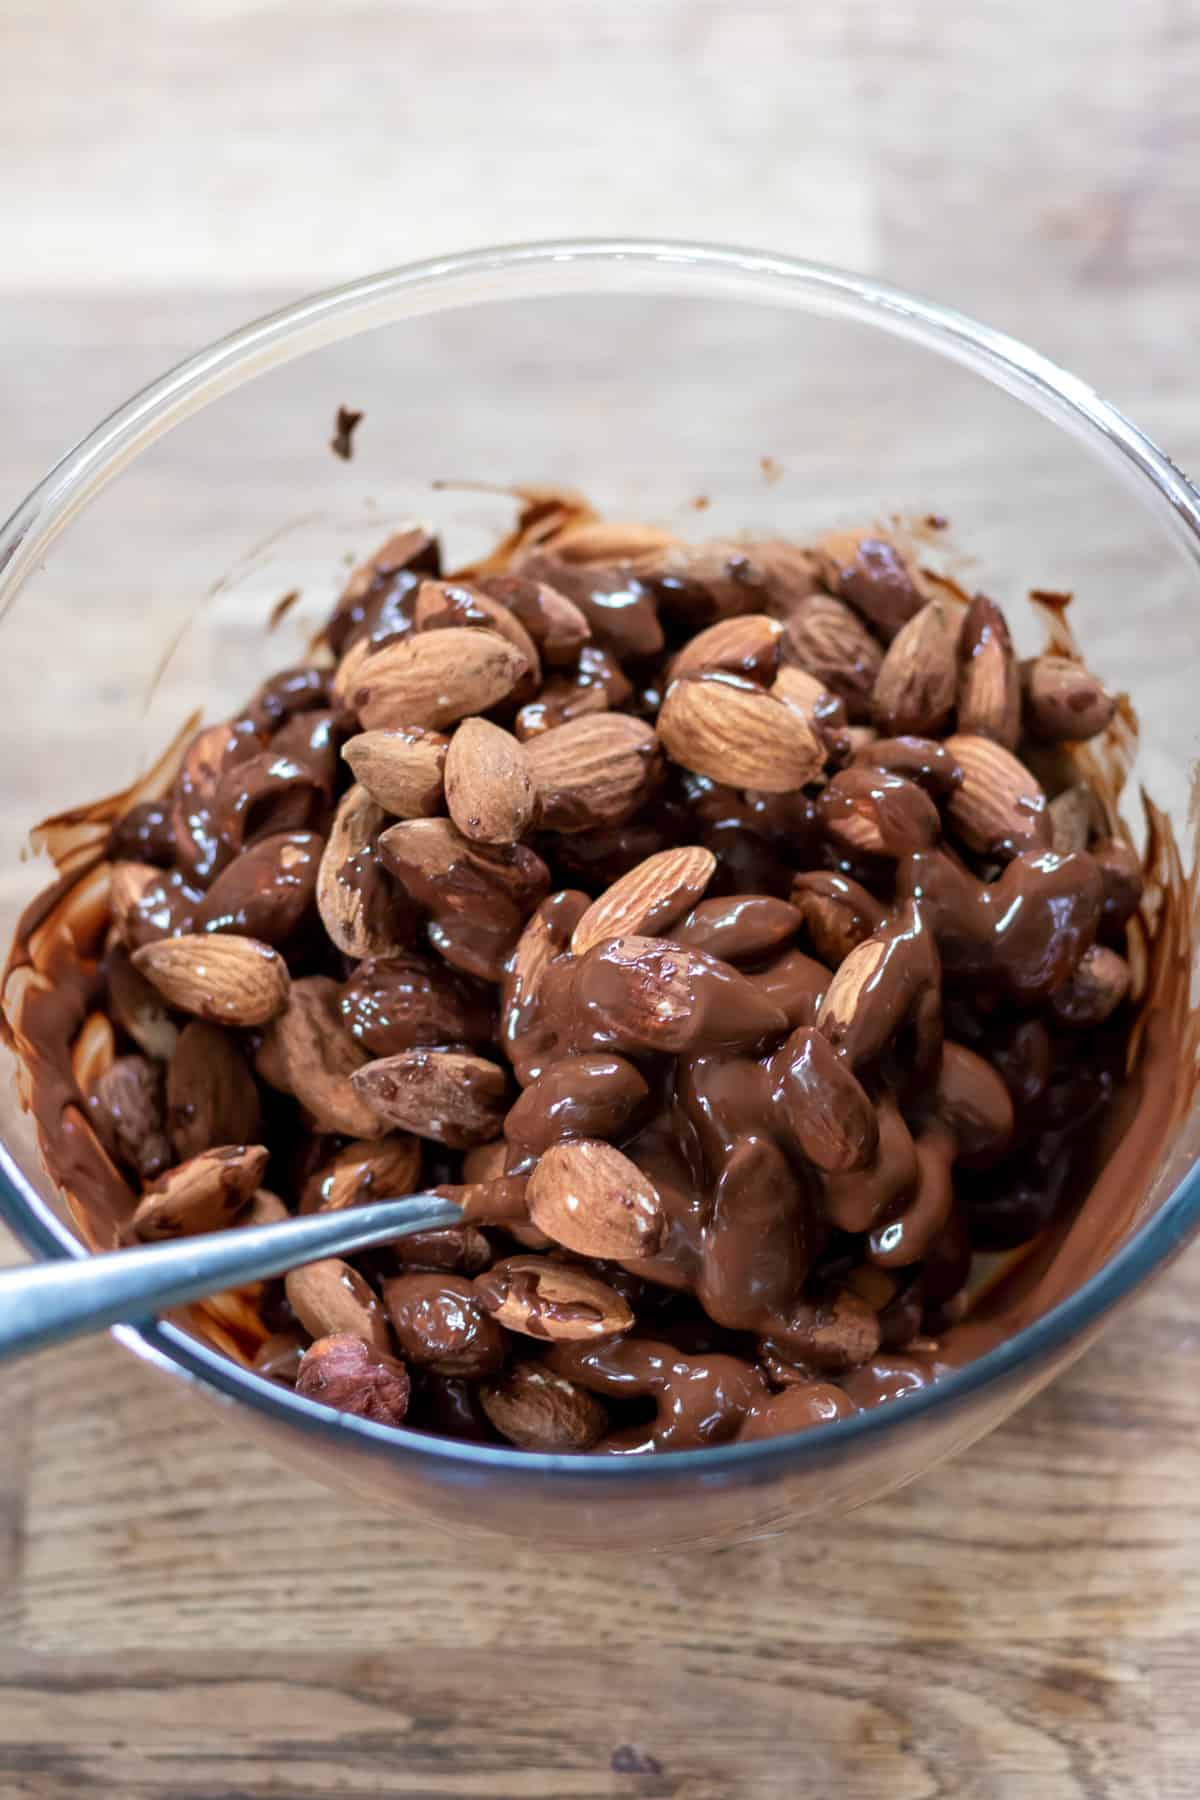 Stirring almonds into the melted chocolate.